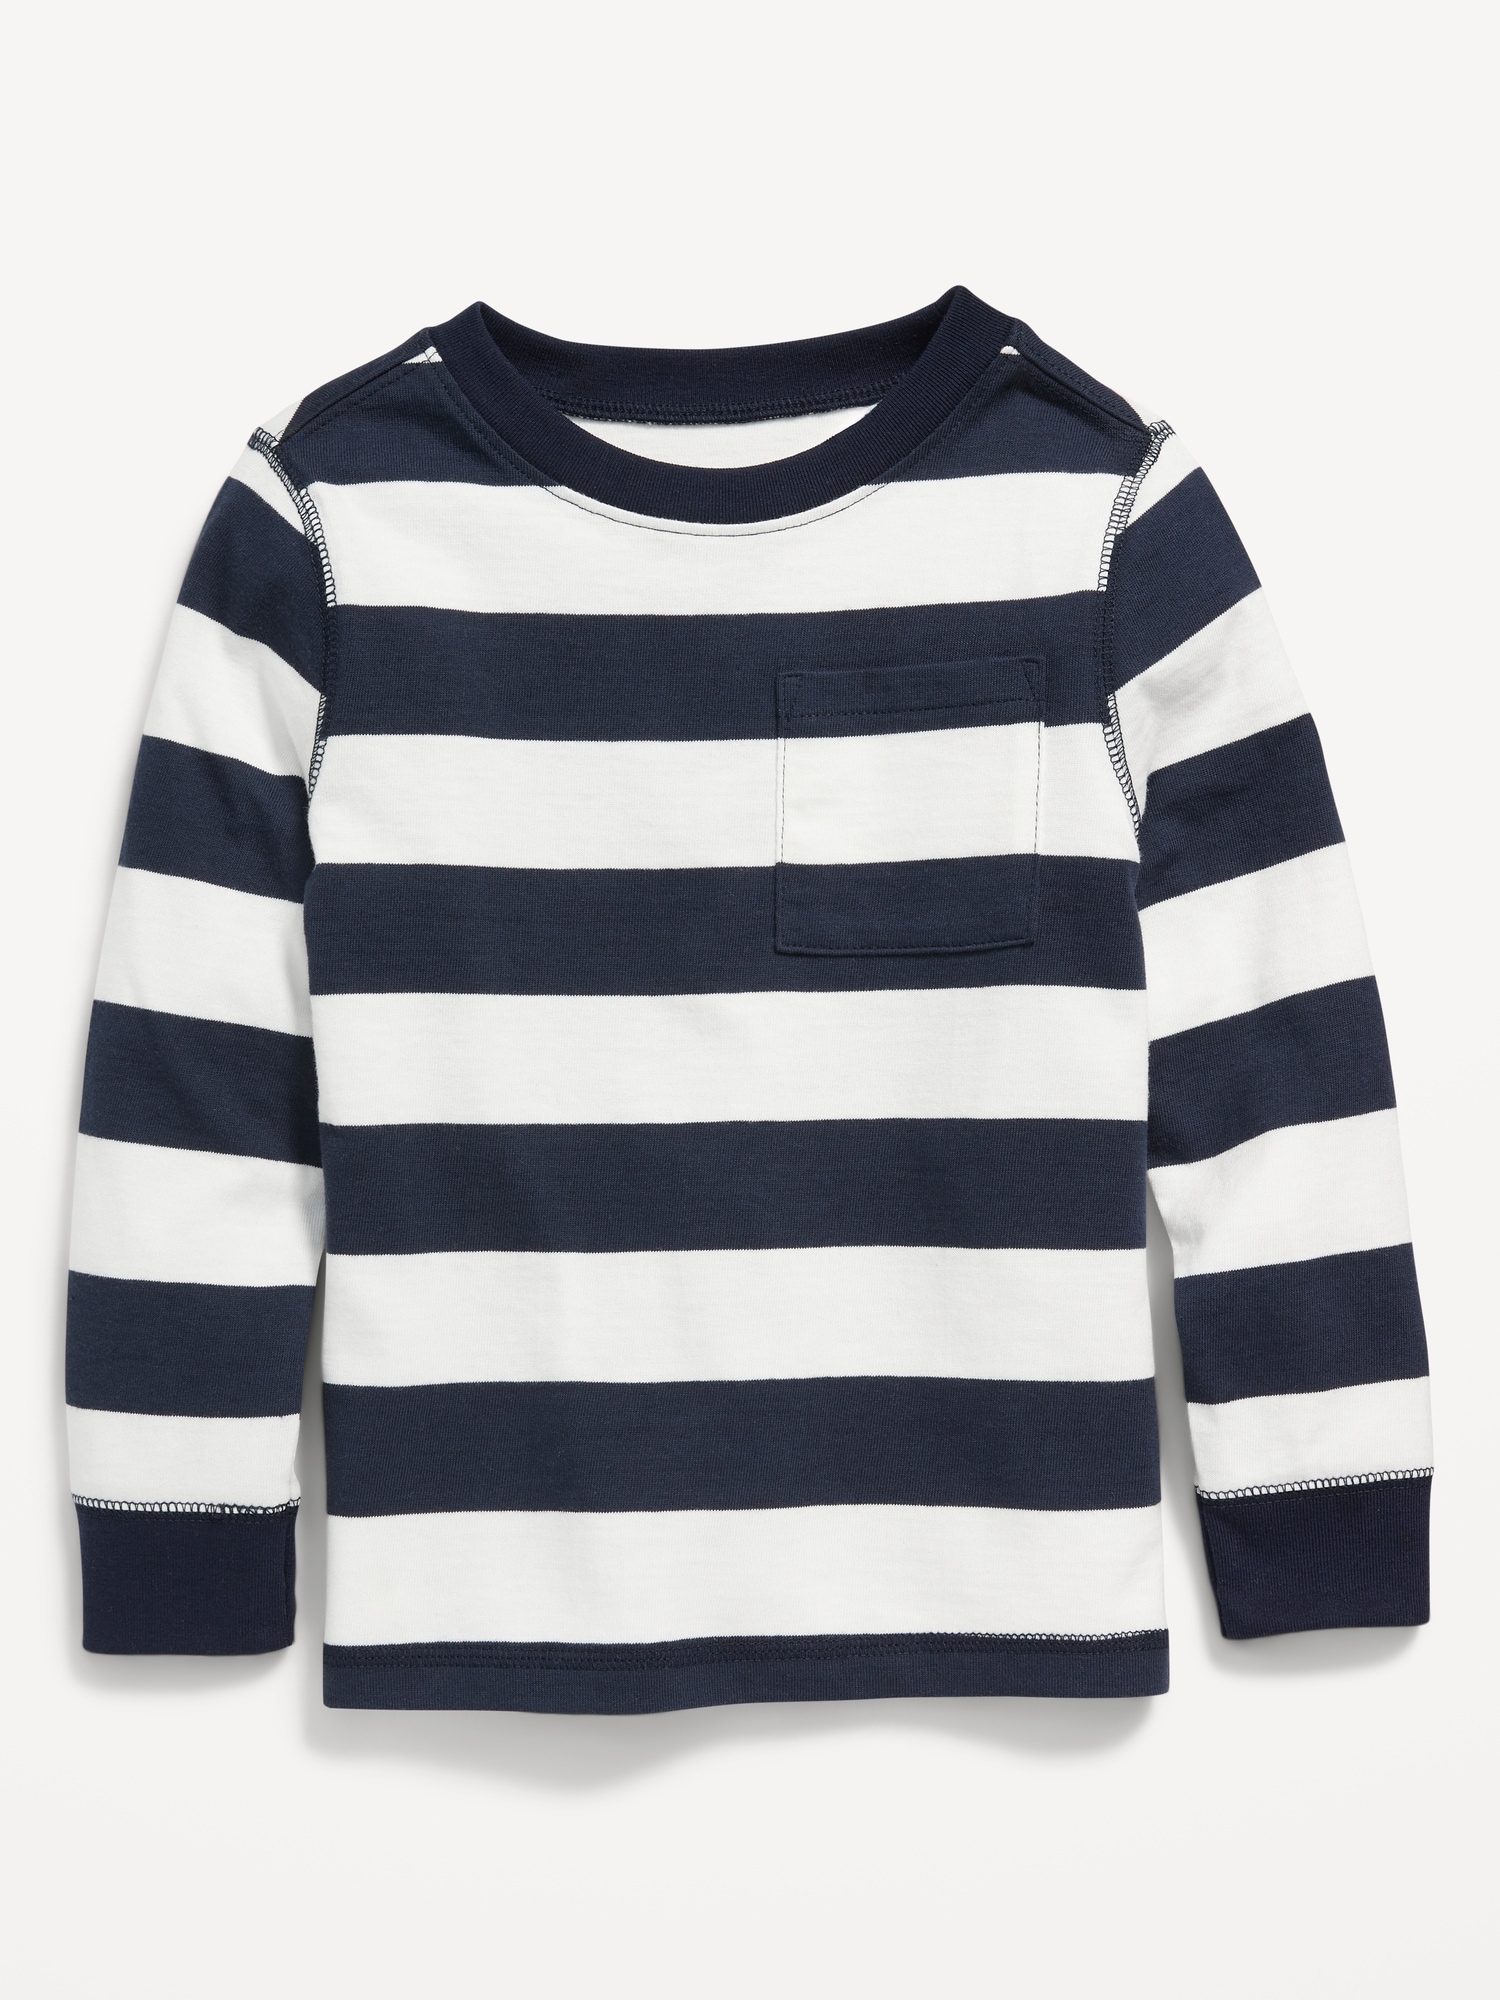 Unisex Long-Sleeve Heavyweight Striped Pocket T-Shirt for Toddler